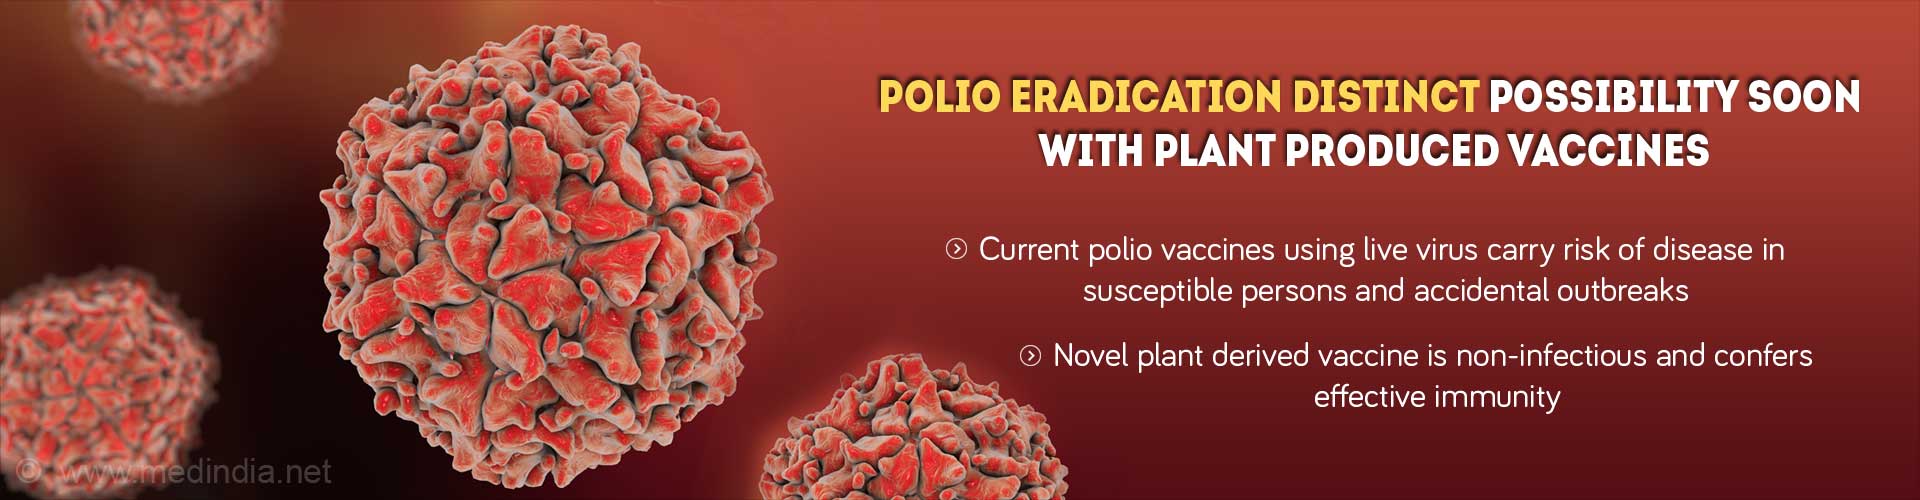 polio eradication distinct possibility soon with plant produced vaccines
- current polio vaccines using live virus carry risk of disease in susceptible persons and accidental outbreaks
- naval plant derived vaccine is non-infectious and confers effective immunity